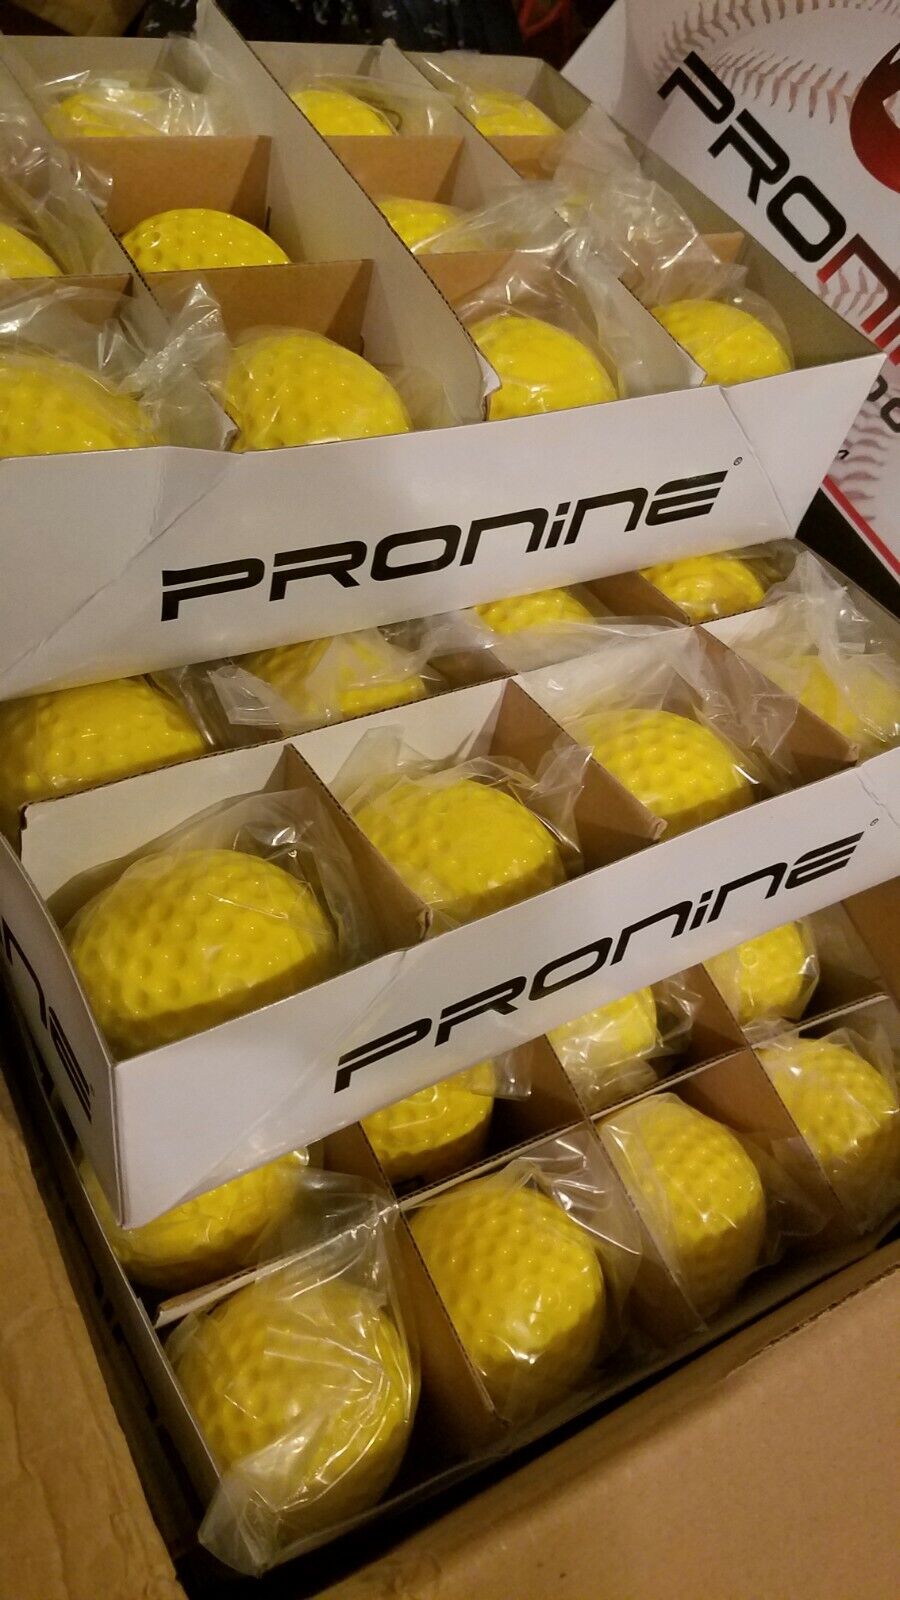 4 Dozen=48 New 12” Inch Mens Dimpled Slow Pitch Softballs Yellow Pro-Nine Pro Nine Does Not Apply